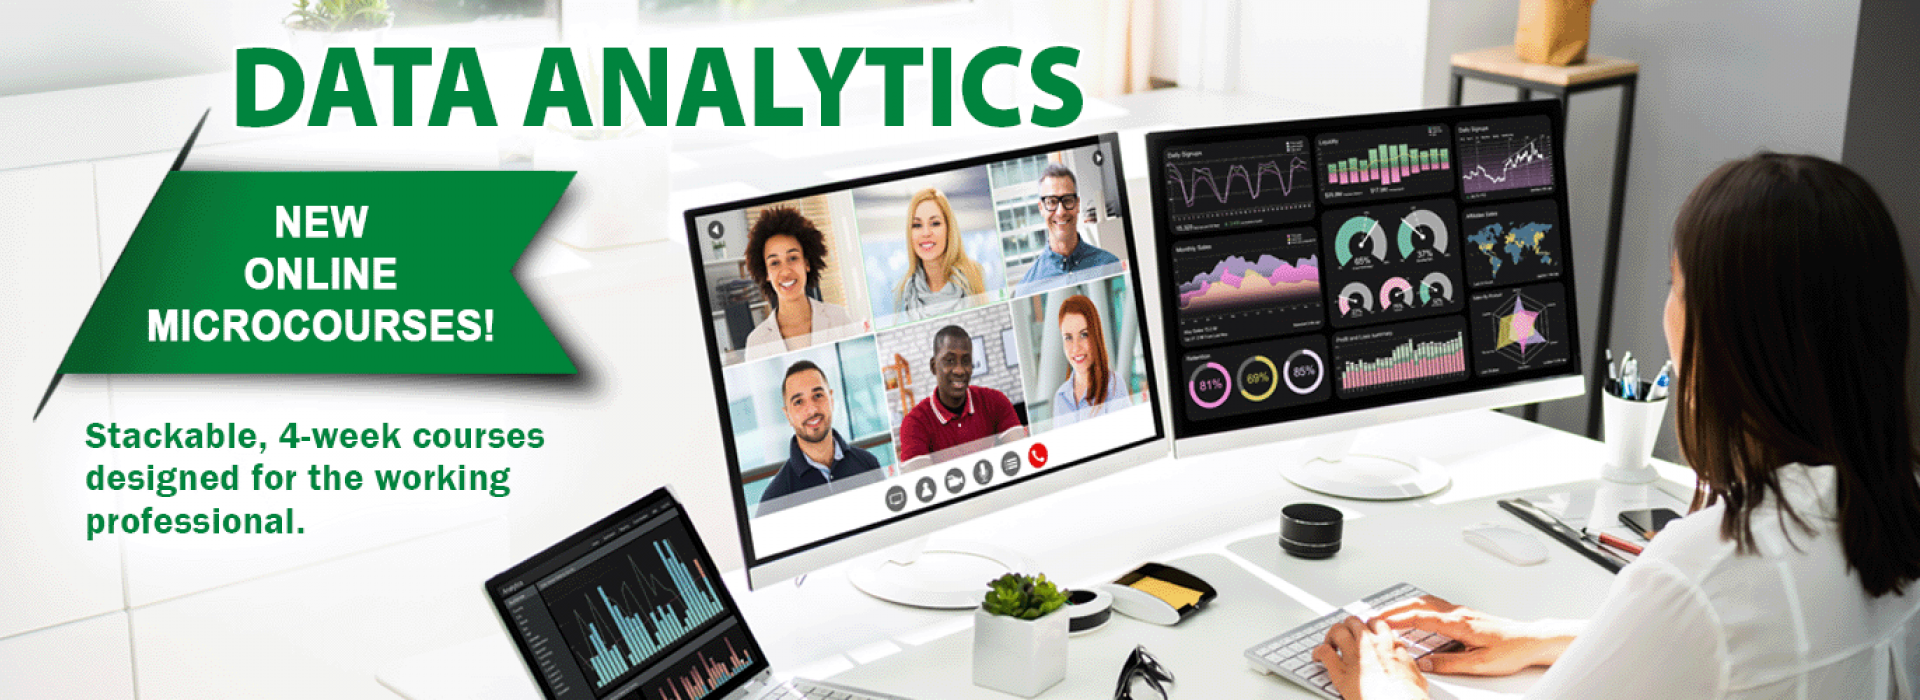 Data Analytics with new Microcourses